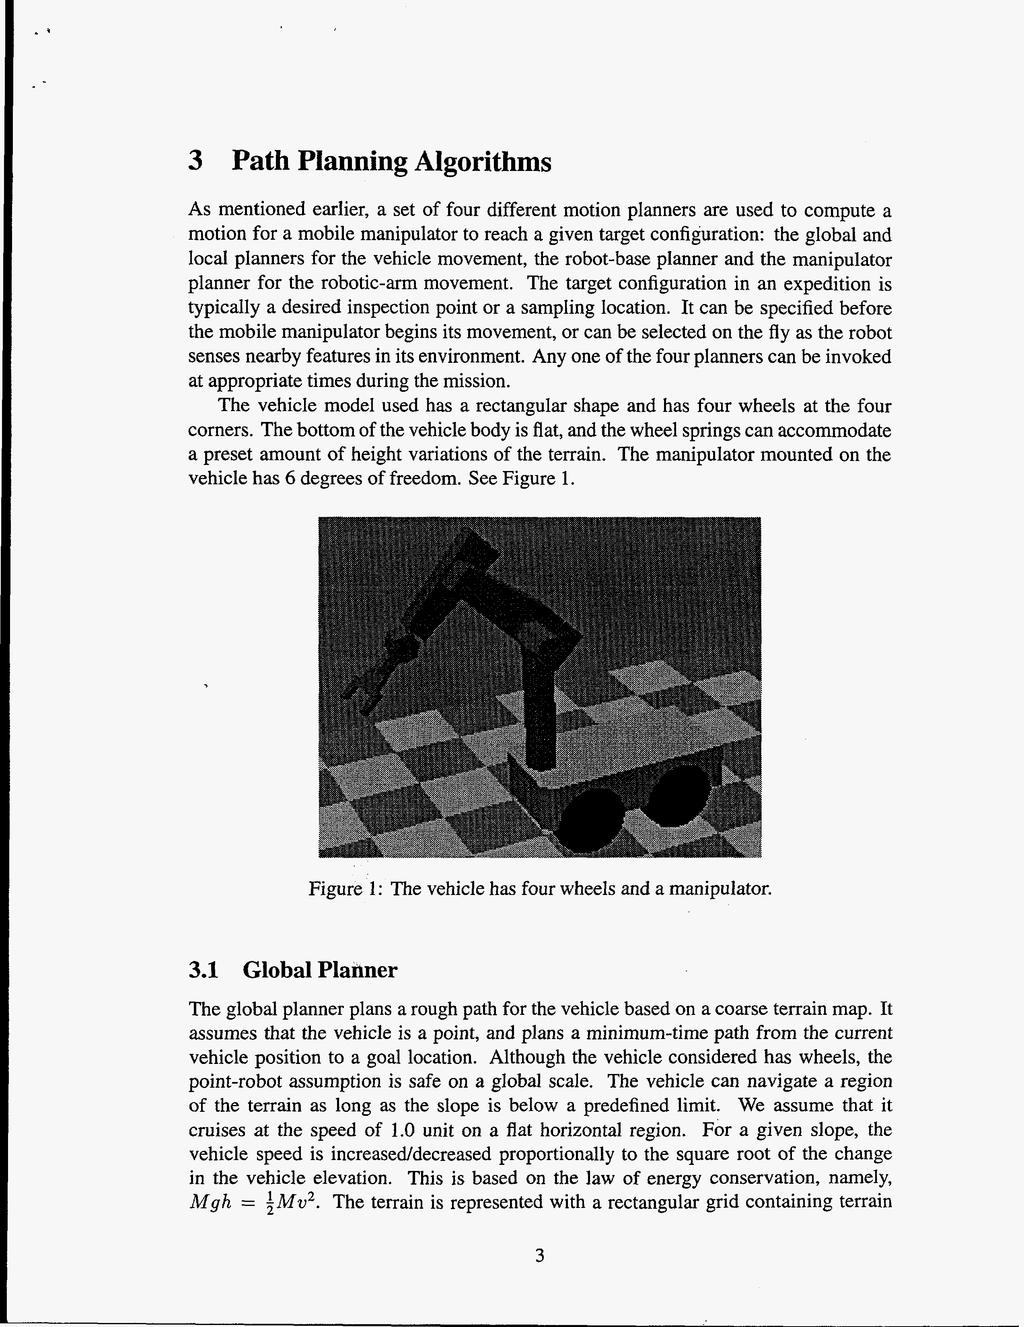 3 Path Planning Algorithms As mentioned earlier, a set of four different motion planners are used to compute a motion for a mobile manipulator to reach a given target configuration: the global and